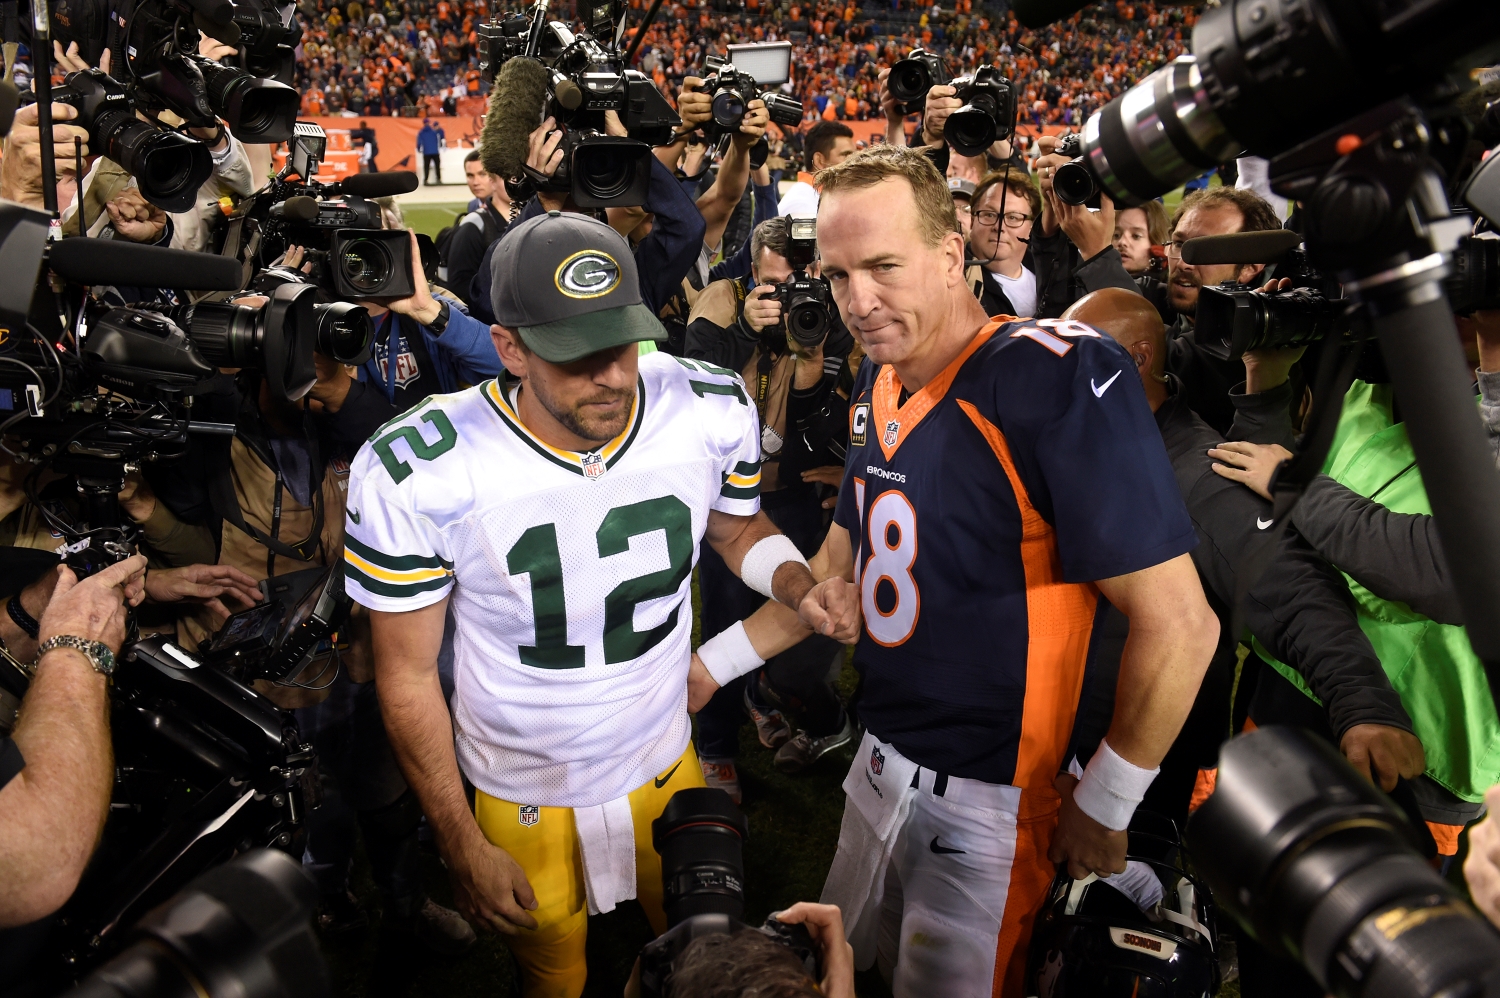 Aaron Rodgers talks to Peyton Manning after a game between the Packers and the Broncos.